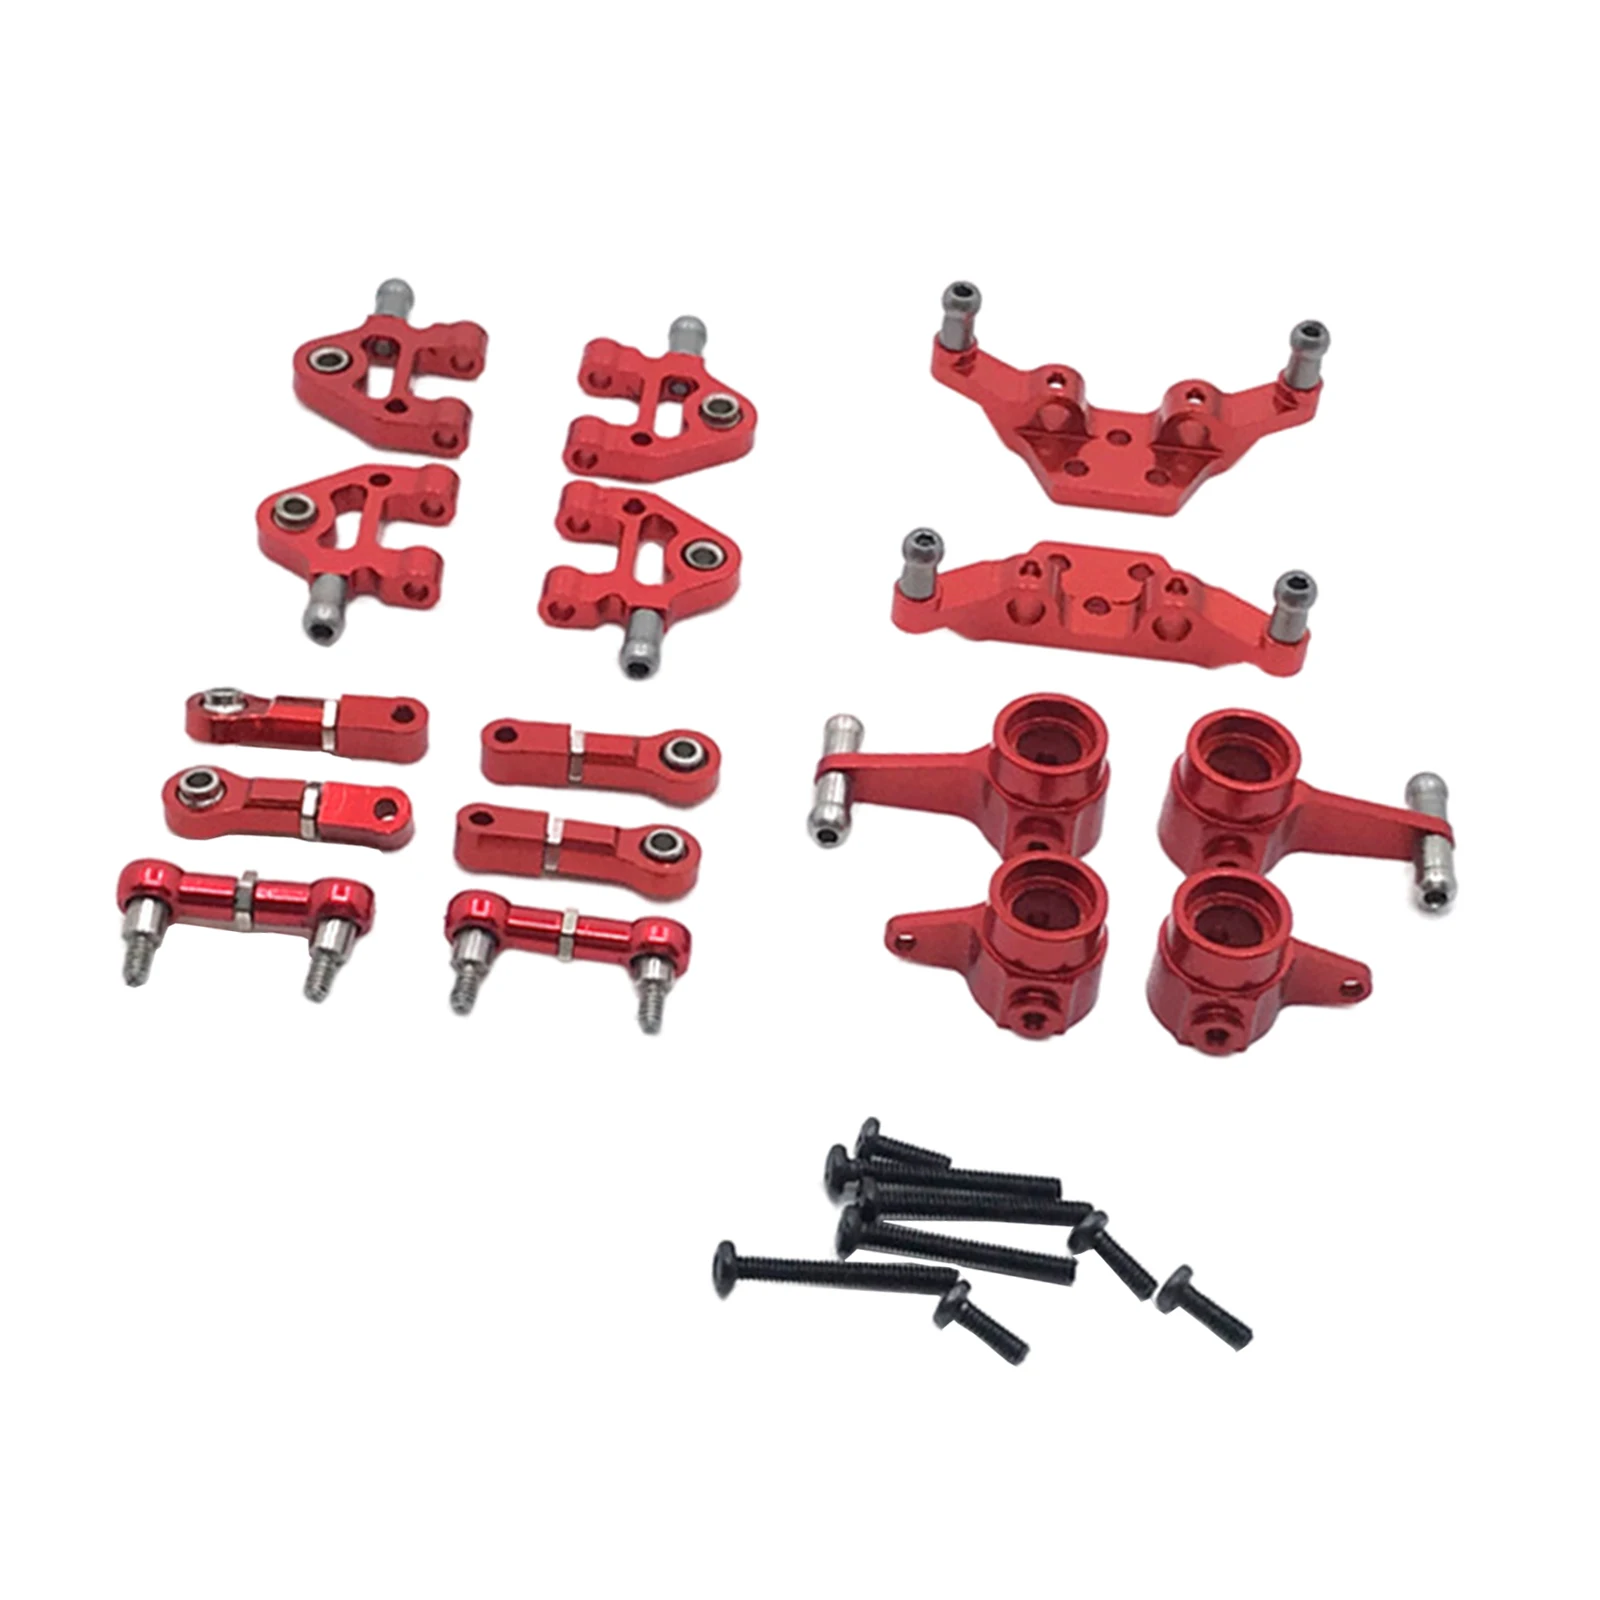 RC Upgrade Metal Kit Shock Towers Brackets , Upper and Lower Swing Arms for Wltoys K969 K979 K989 1/28 Truck Car Accessories